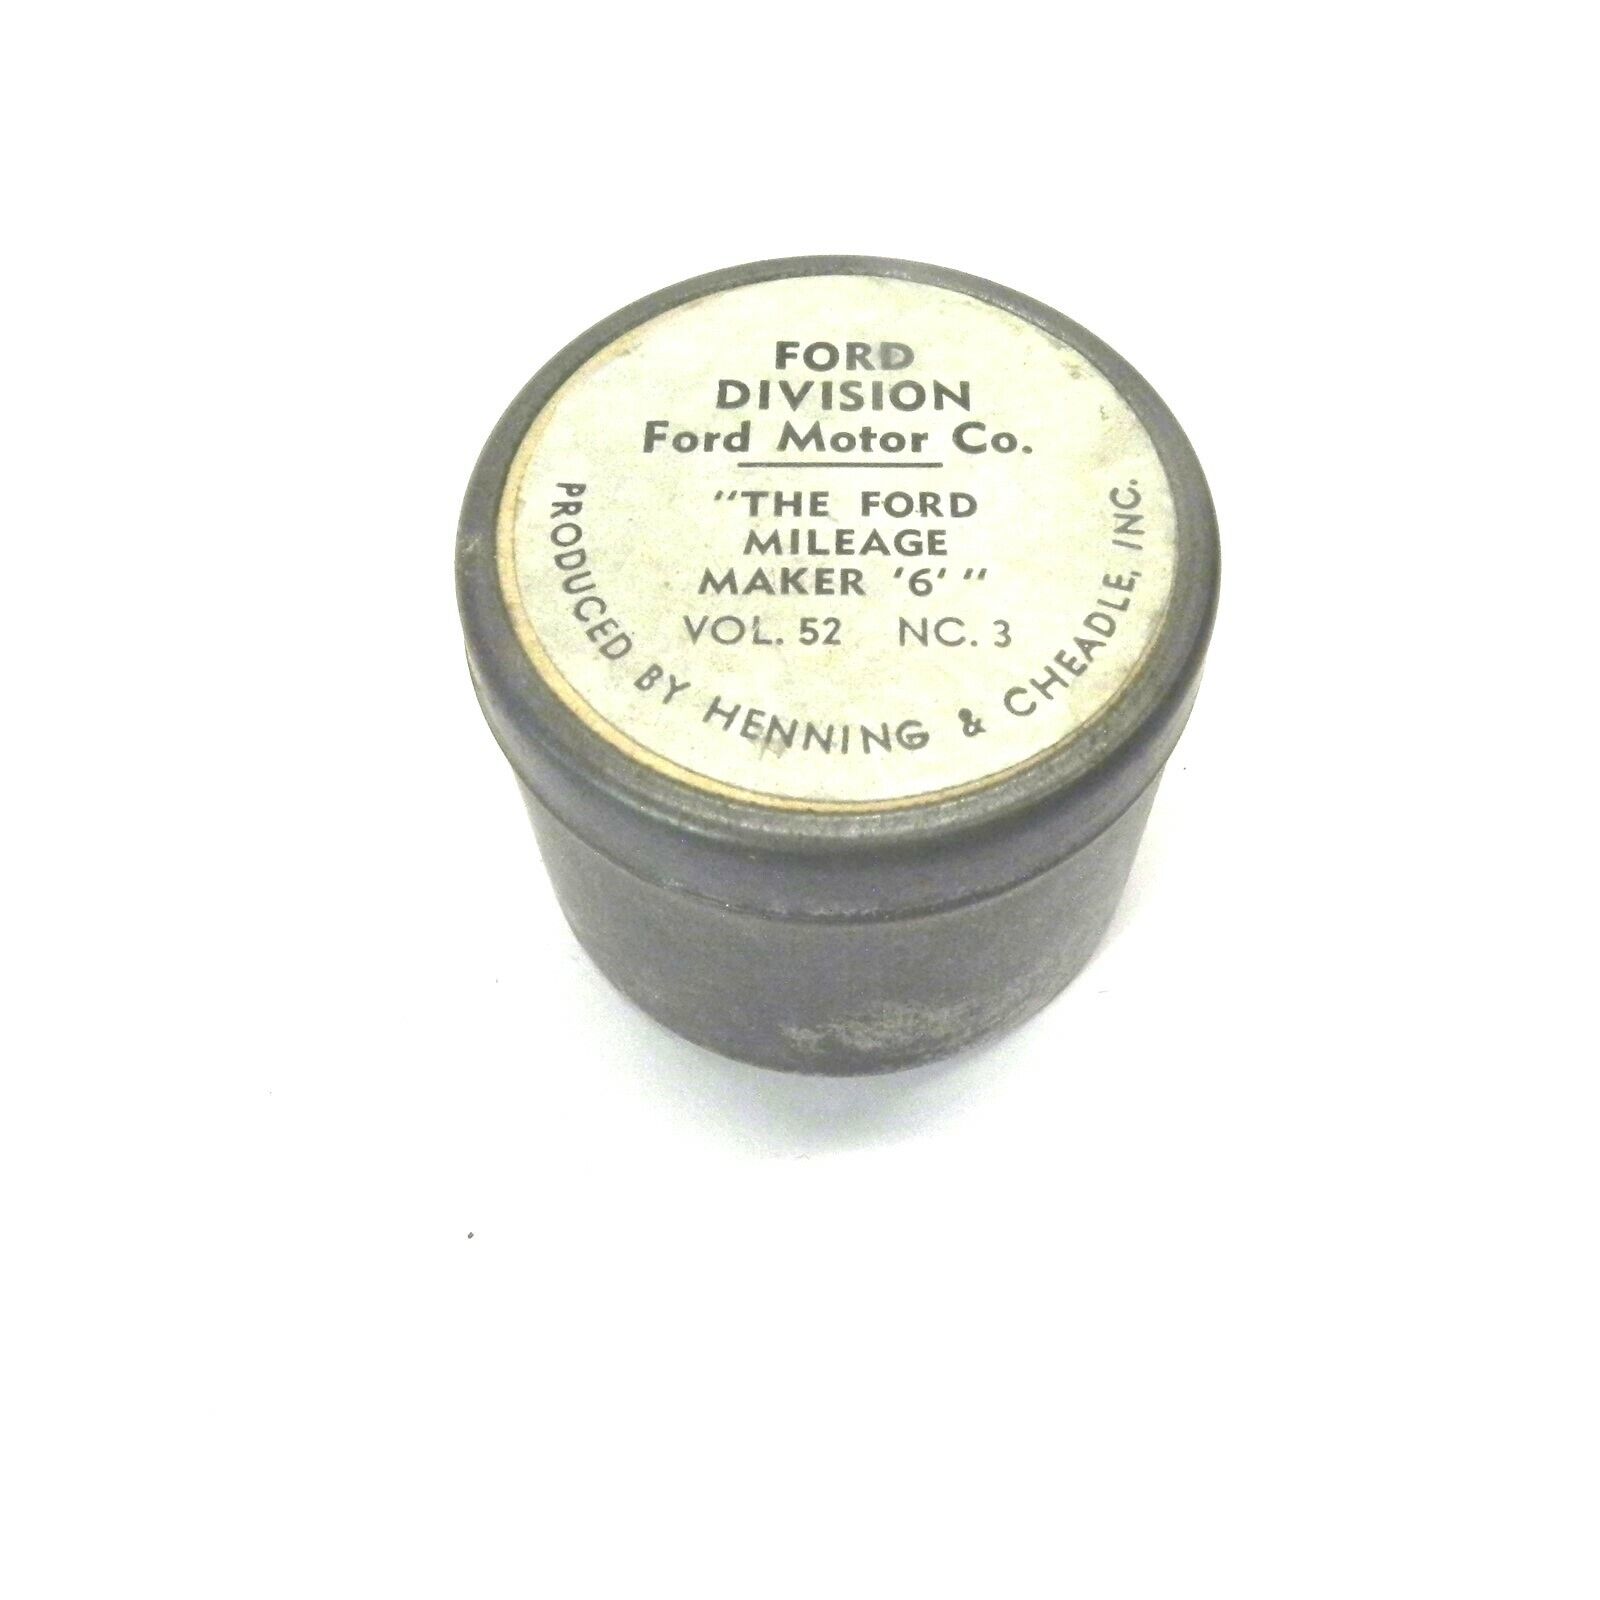 FORD THE FORD MILAGE MARKER \'6\' TIN CAN FOMOCO CANT OPEN VINTAGE SMALL CAN TIN 